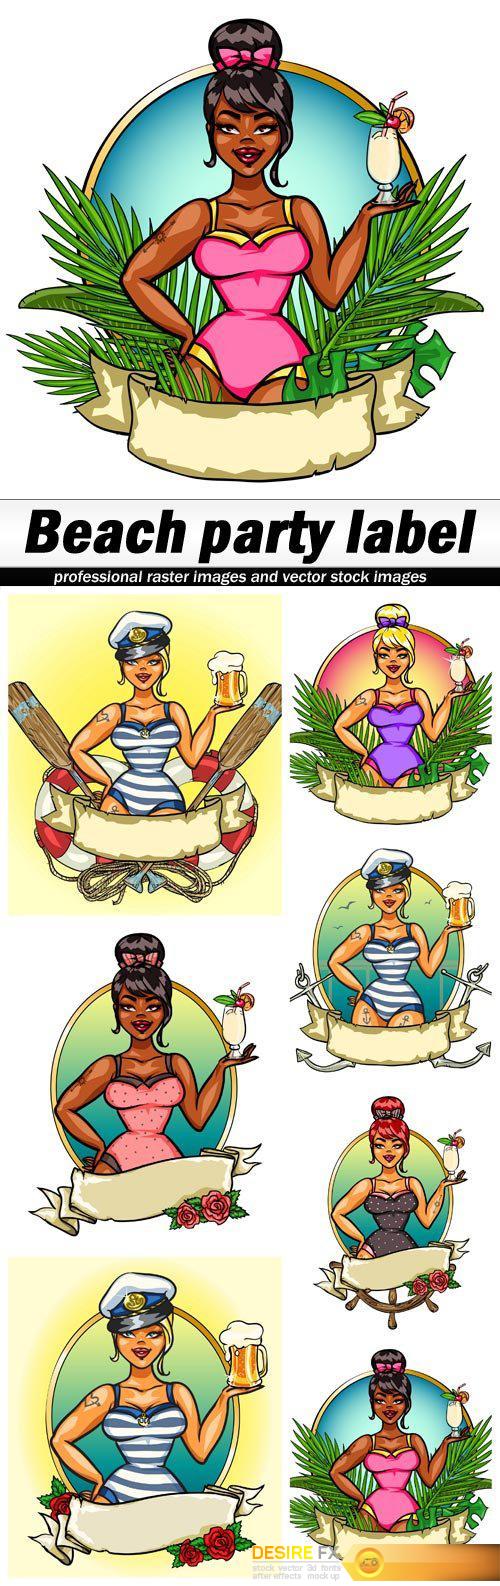 Beach party label - 7 EPS